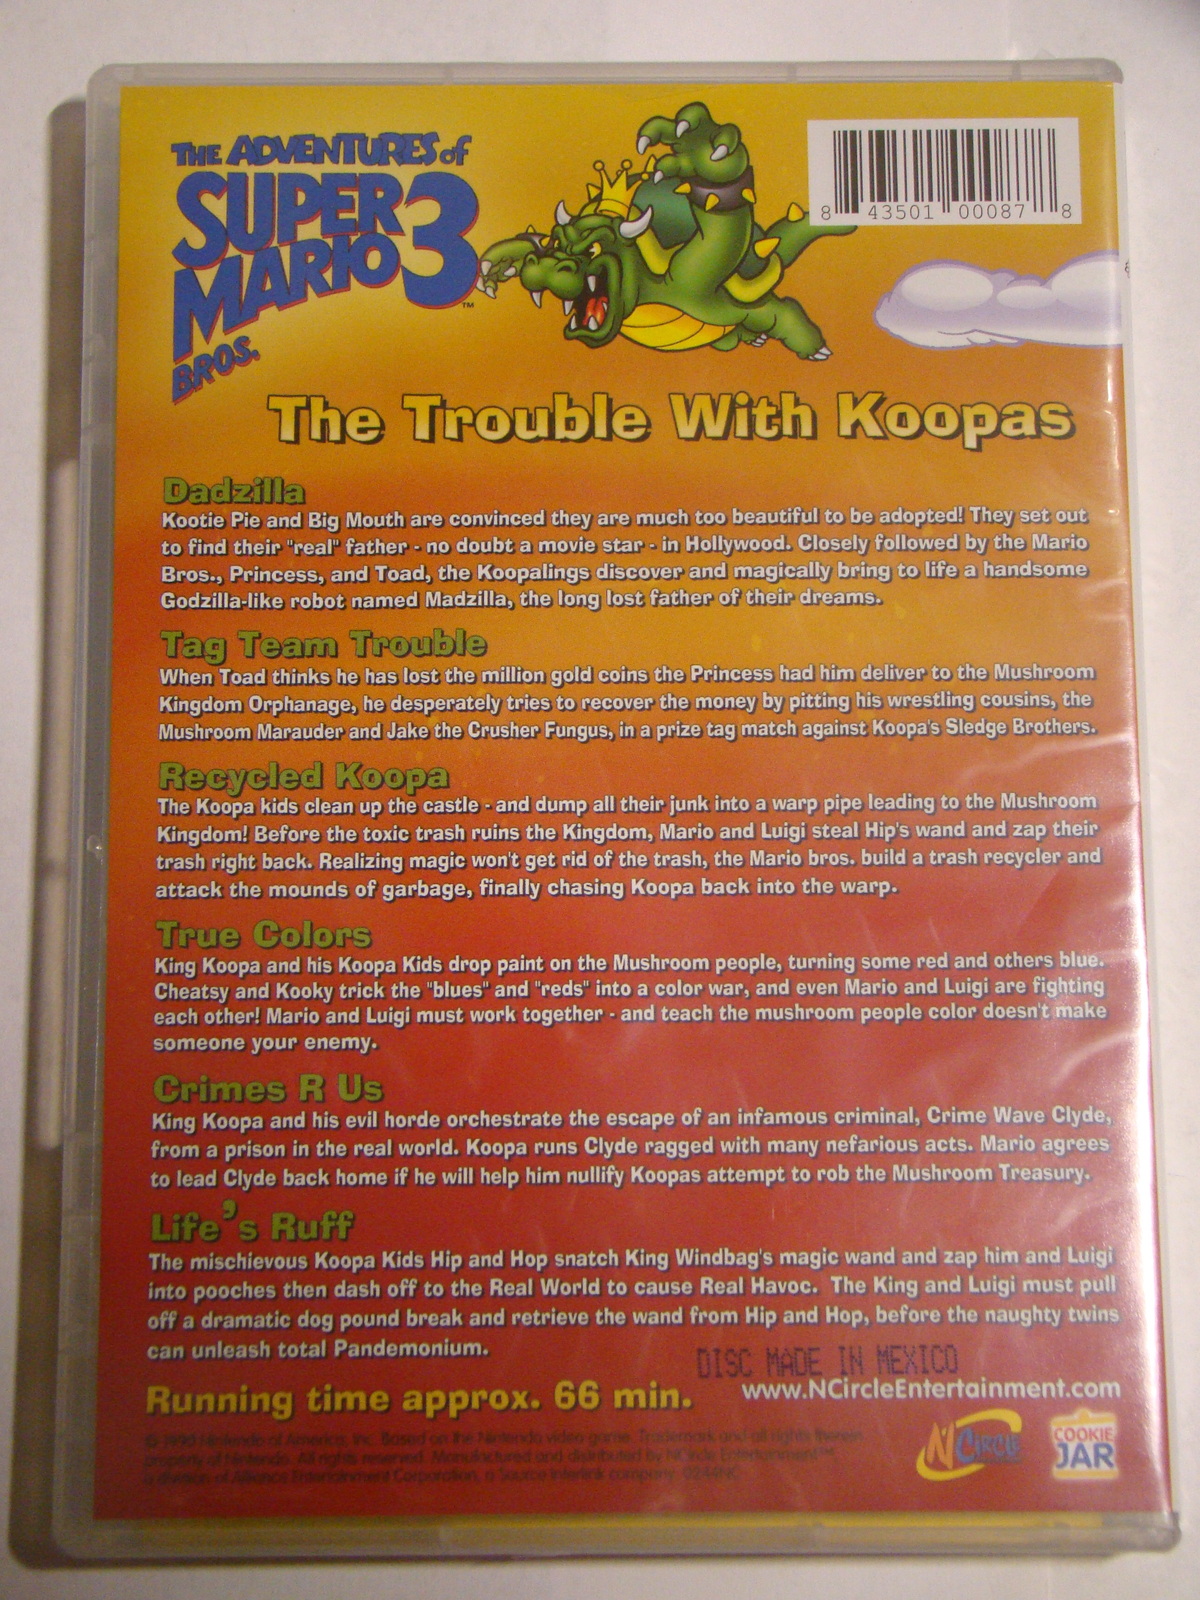 THE ADVENTURES of SUPER MARIO BROS. 3 - The Trouble With Koopas (Dvd ...